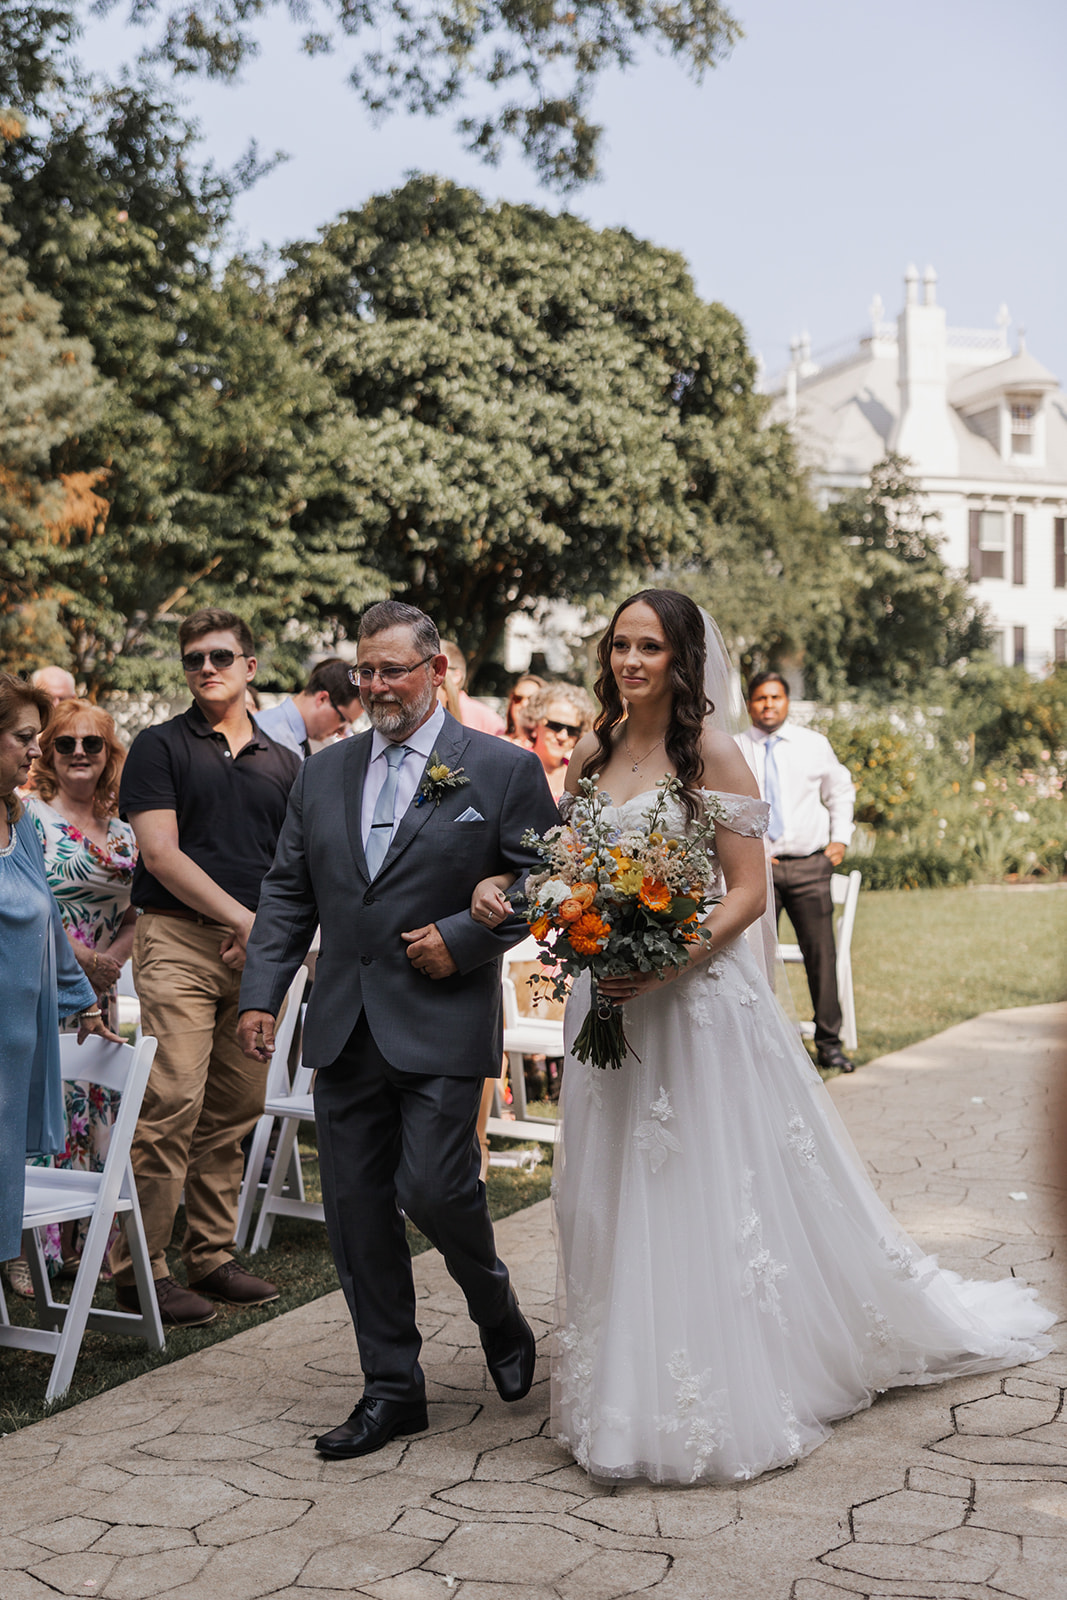 Father walks his daughter down the aisle in her sentimental Georgia wedding